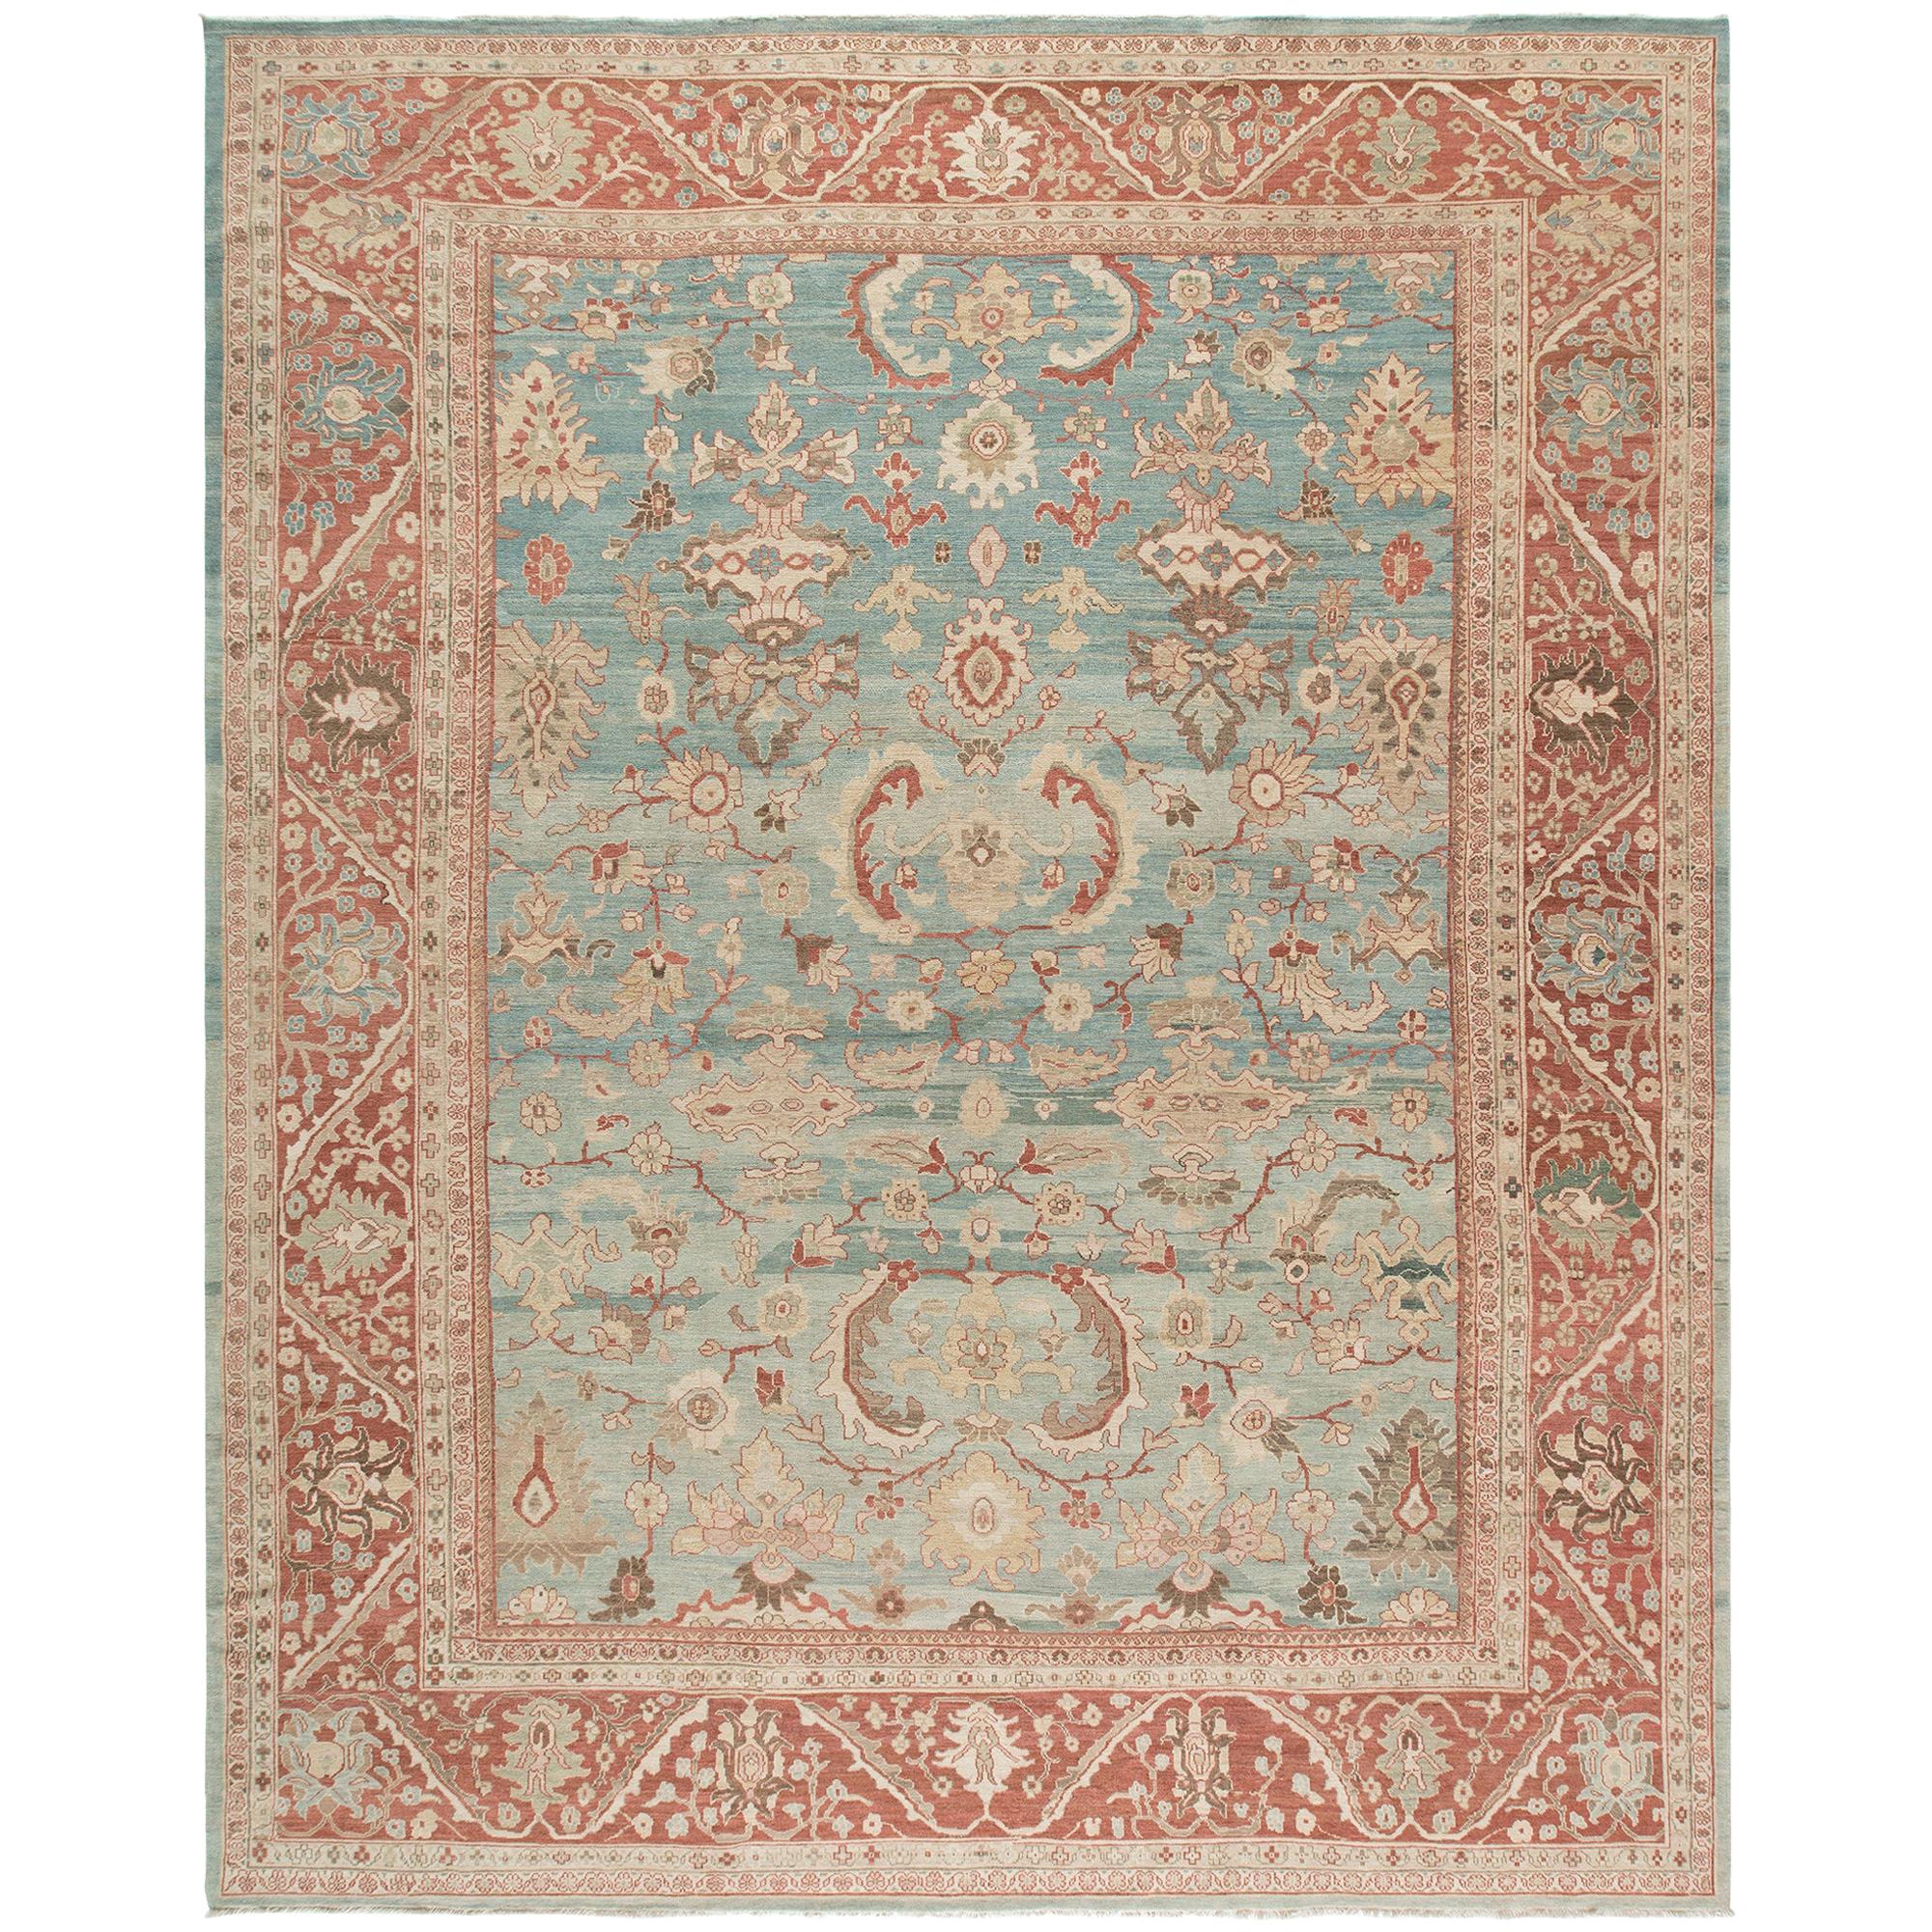 Original Persian Ziegler Sultanabad Hand Knotted Rug in Camel, Blue and Red